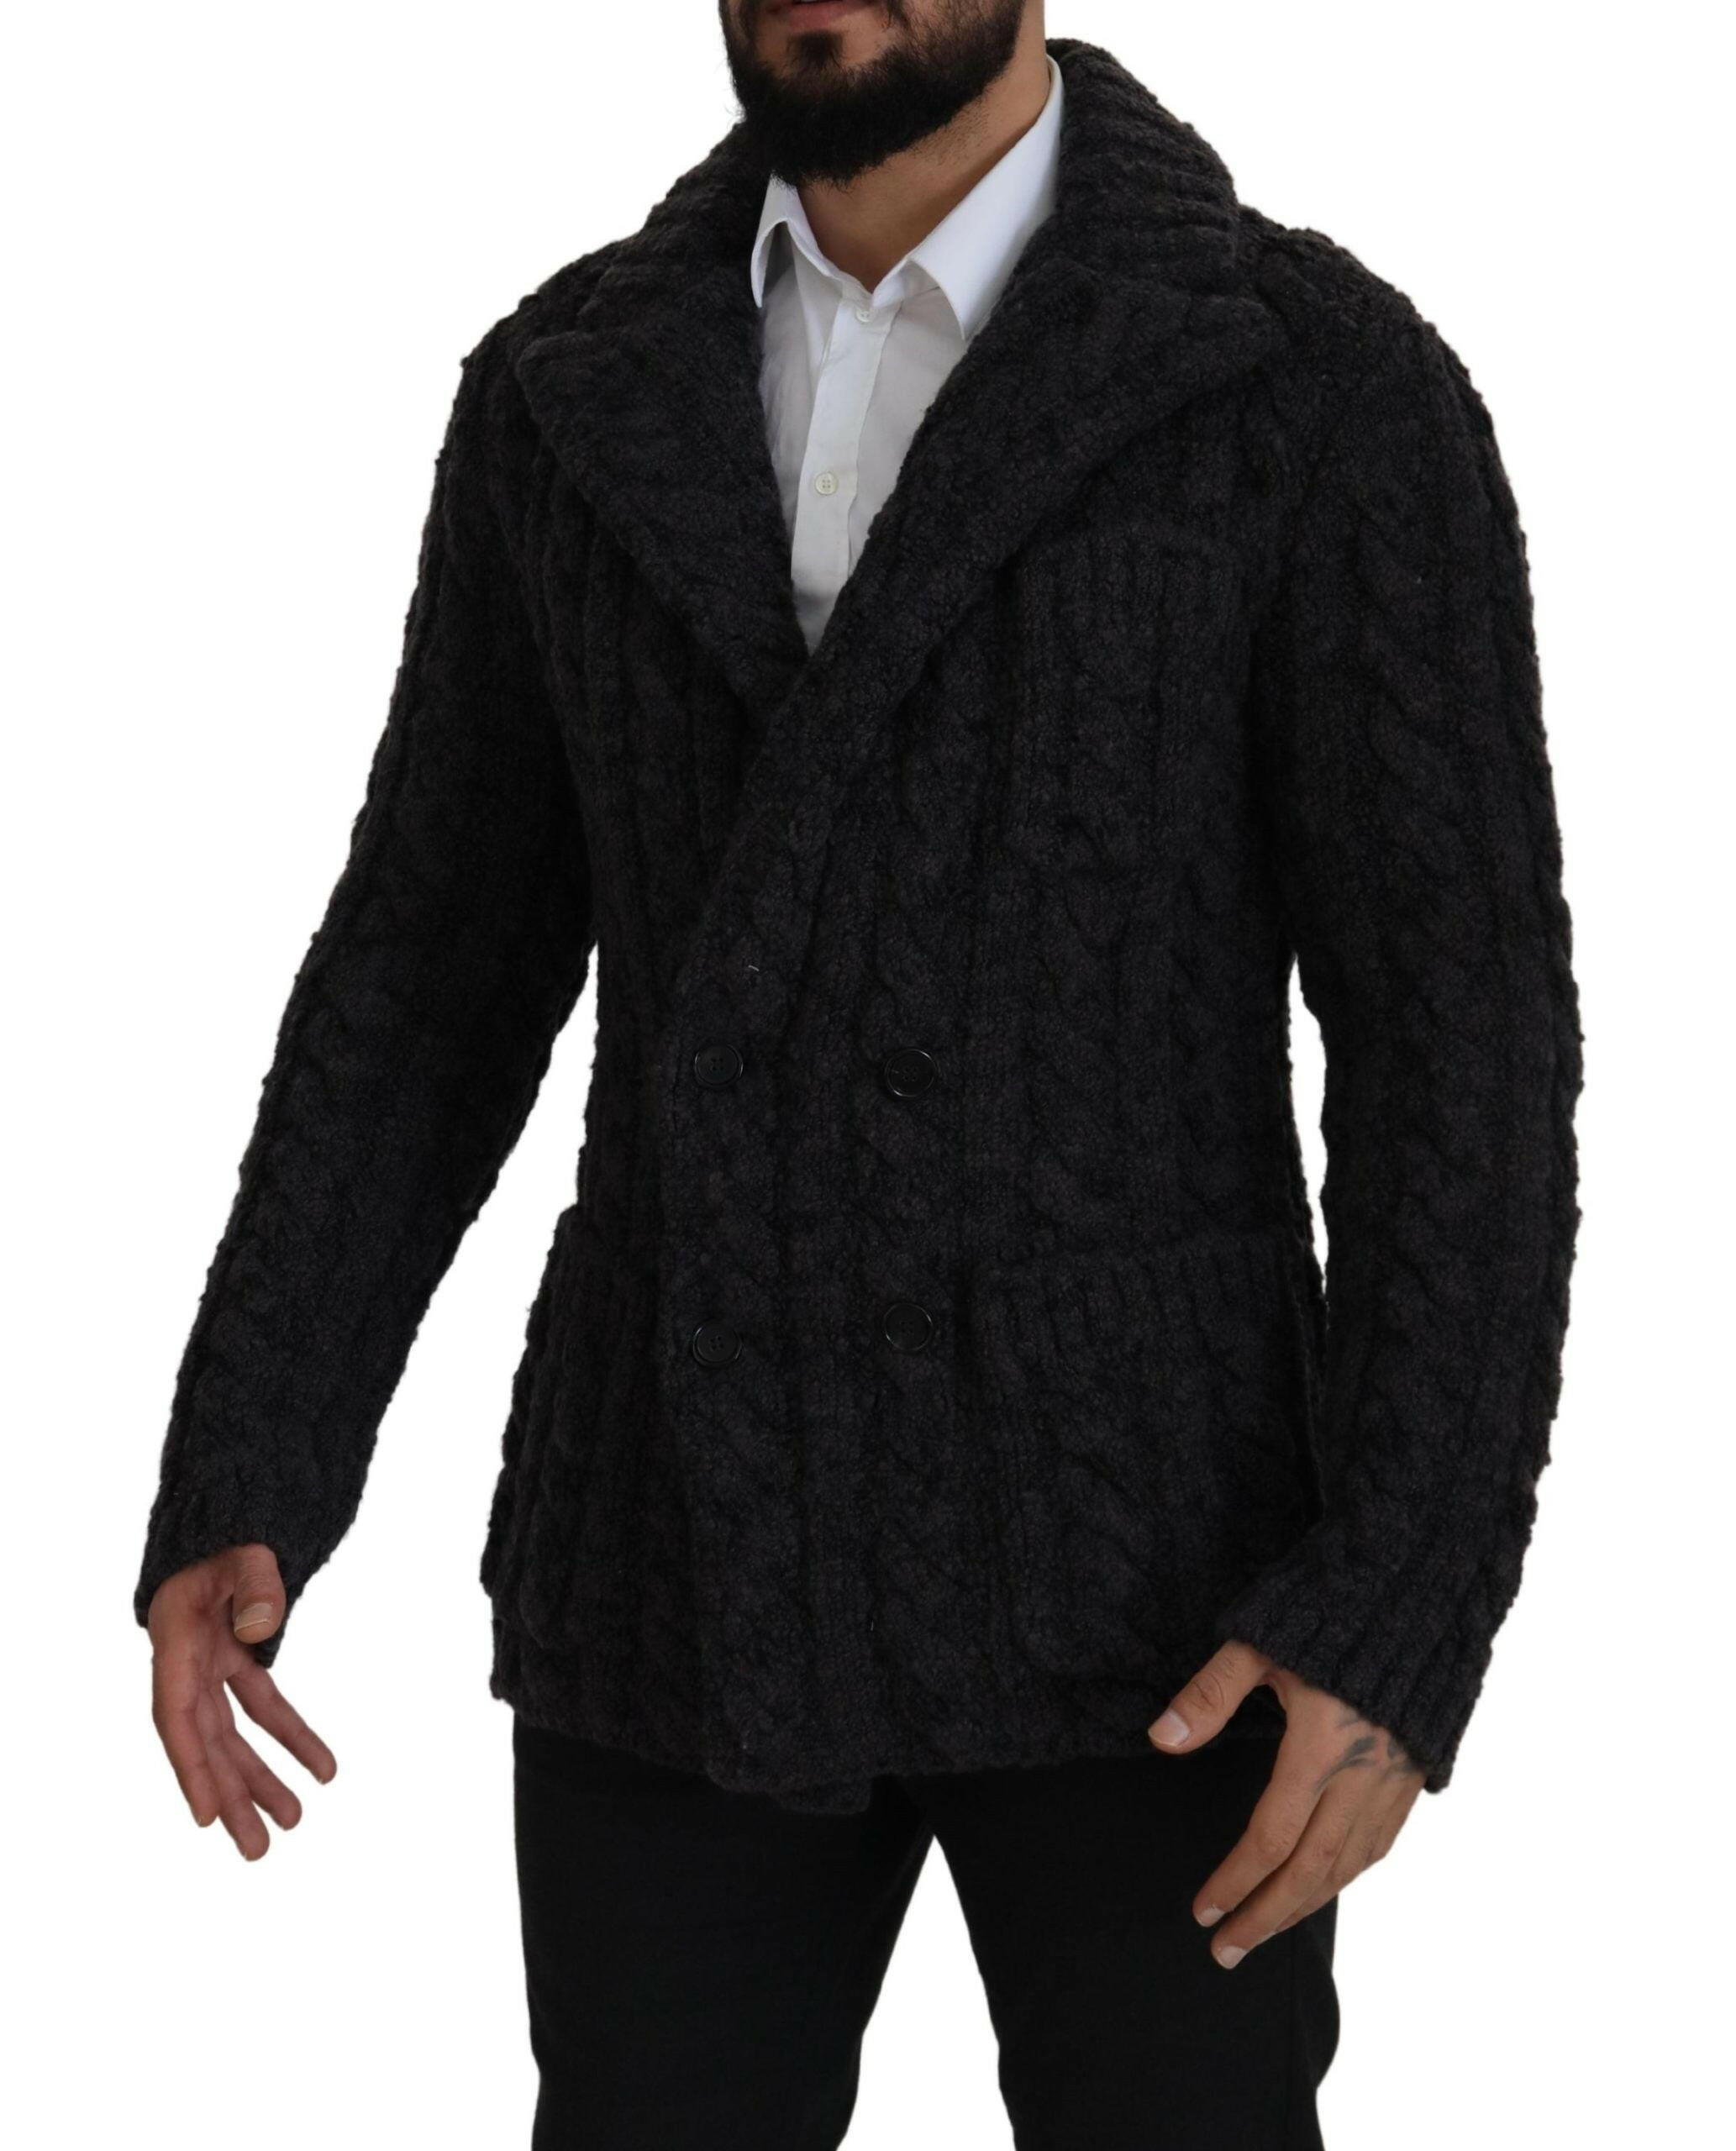 Dolce & Gabbana Black Wool Knit Double Breasted Coat Jacket - GENUINE AUTHENTIC BRAND LLC  